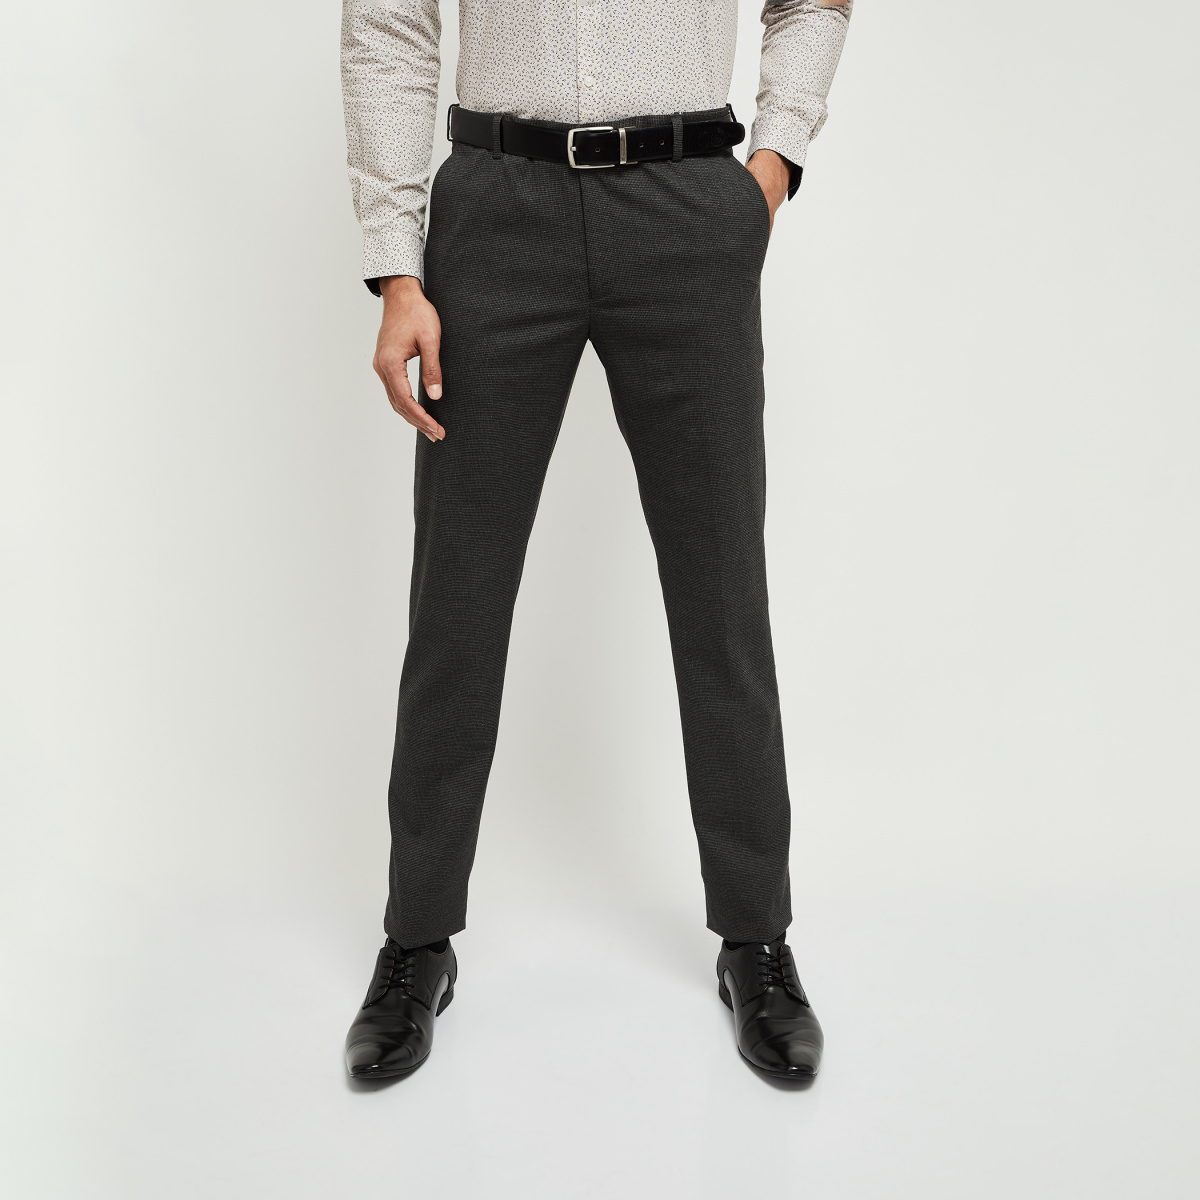 Buy White Straight Fit Formal Trousers Online | Fablestreet